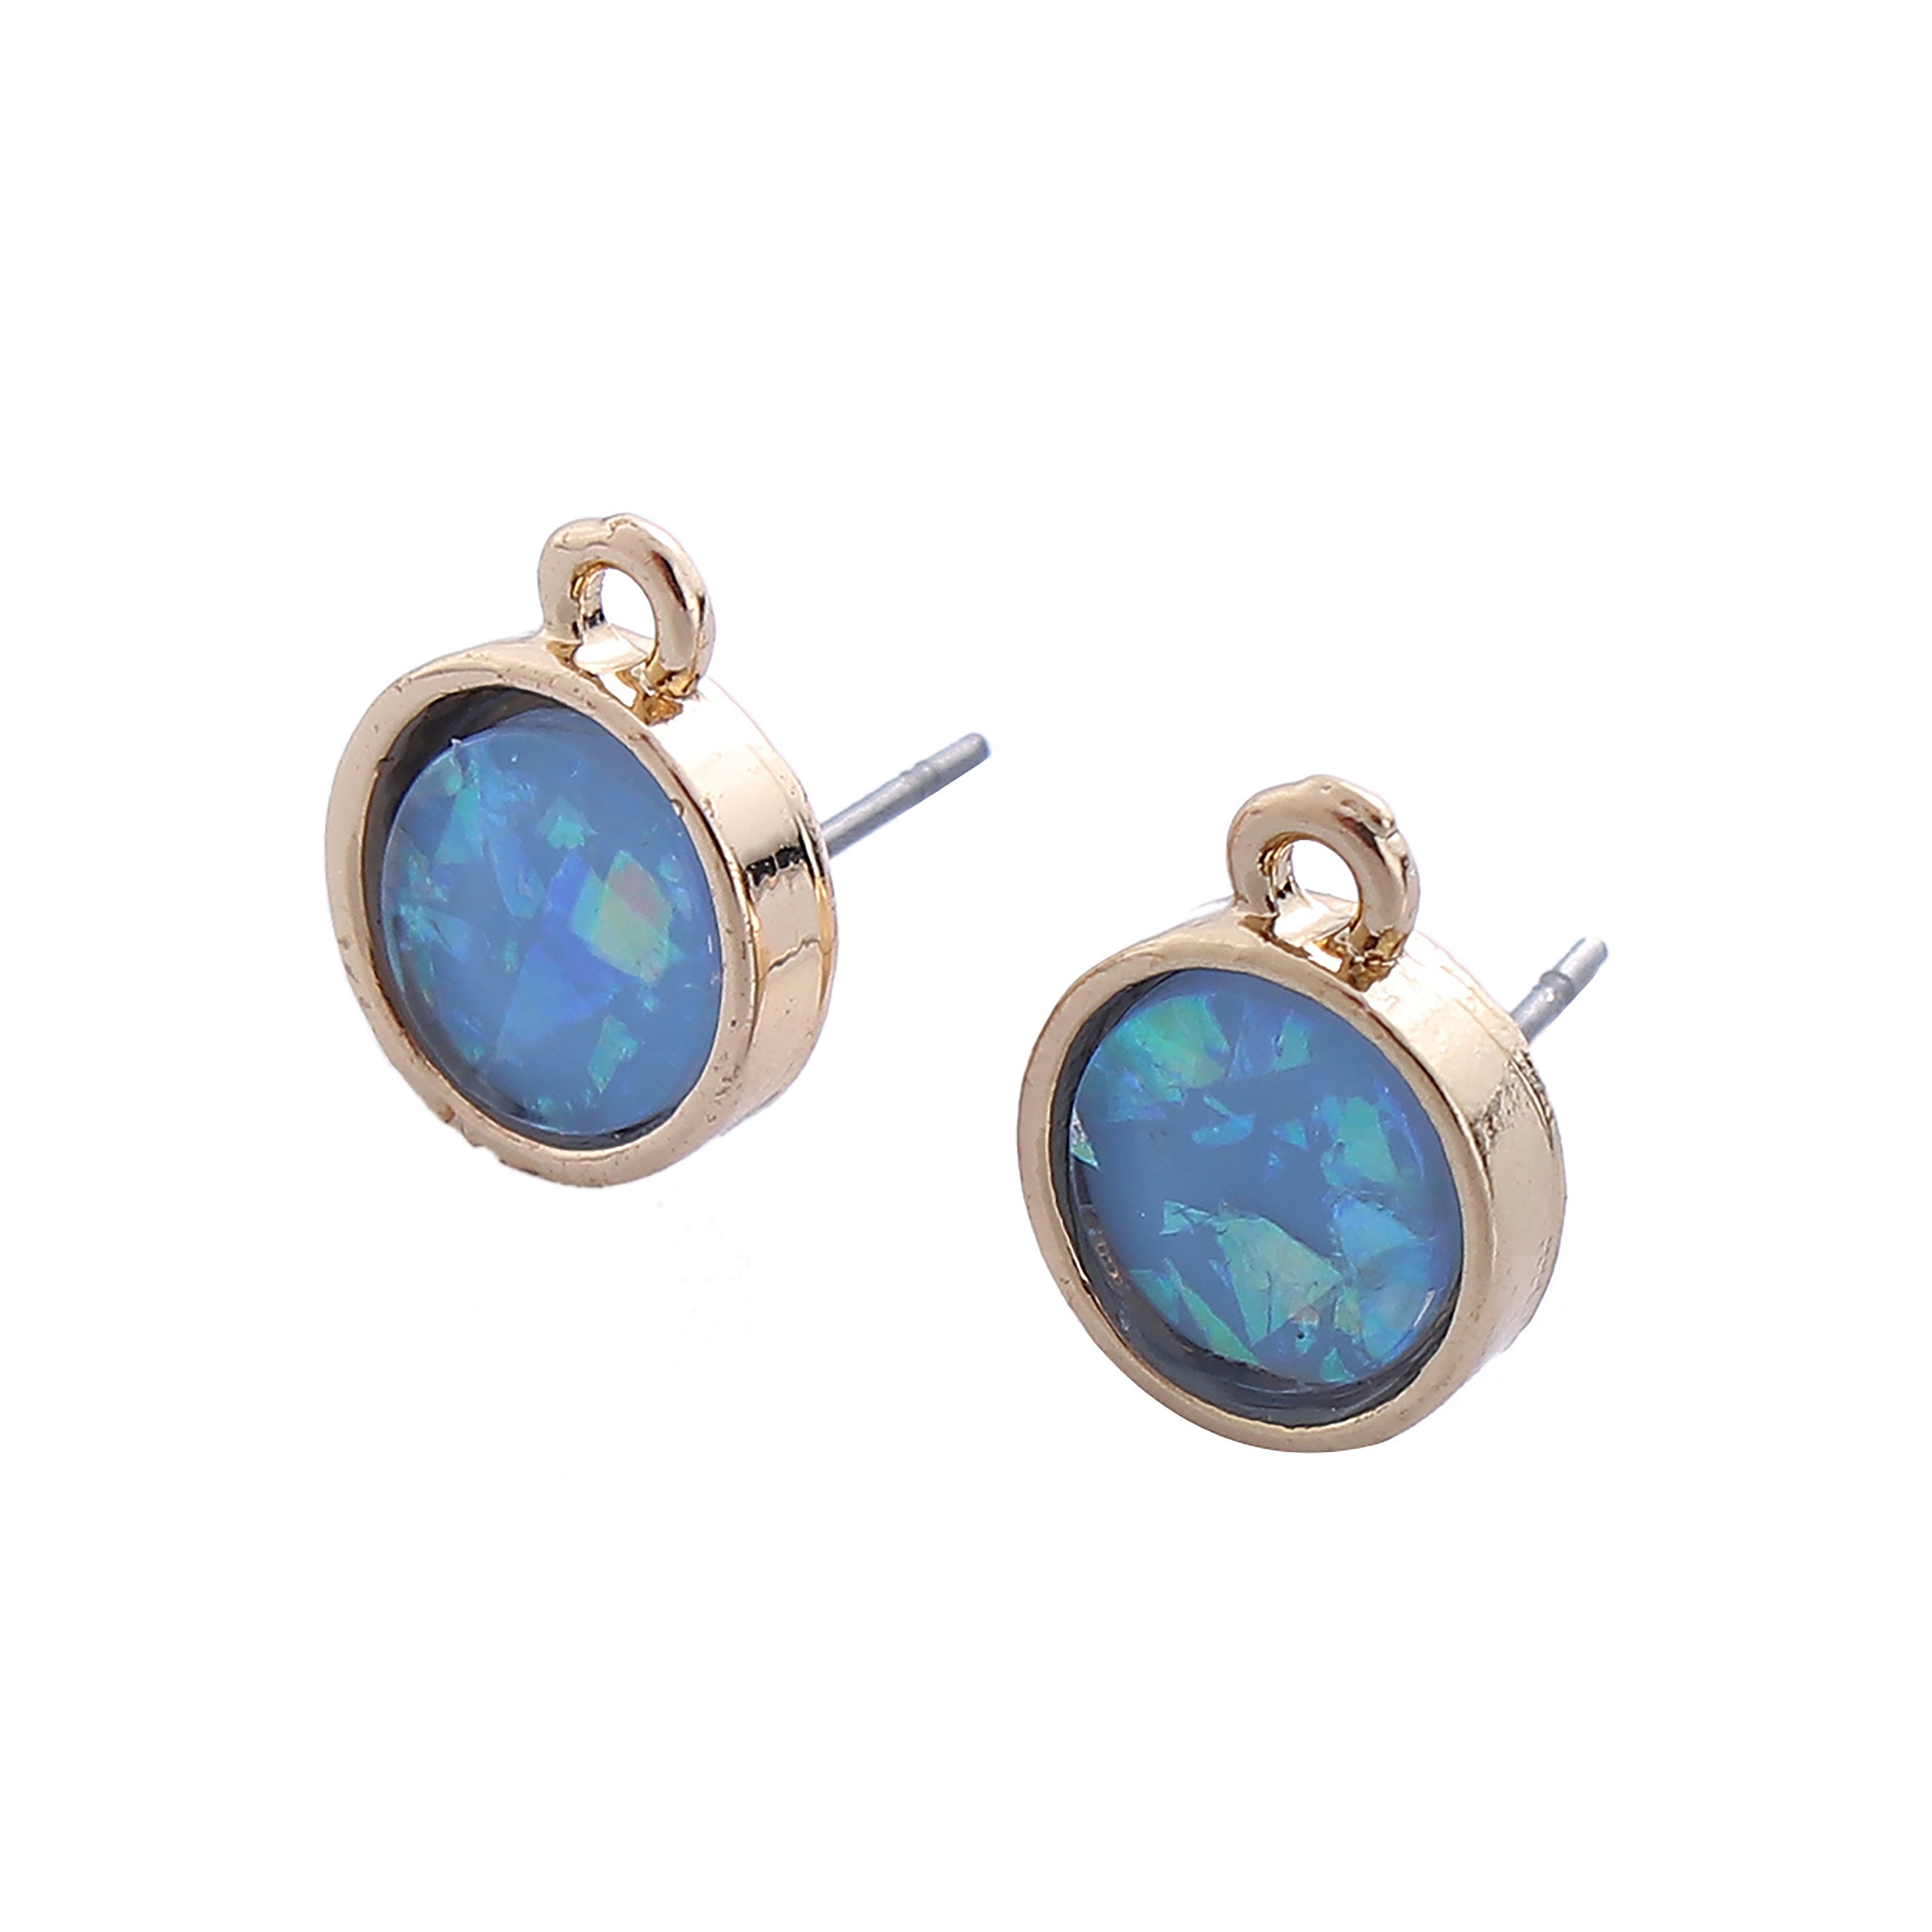 1 Pair, 10mm, Zinc Based Alloy Round Resin Ear stud finding Gold Plated Blue W/ Loop